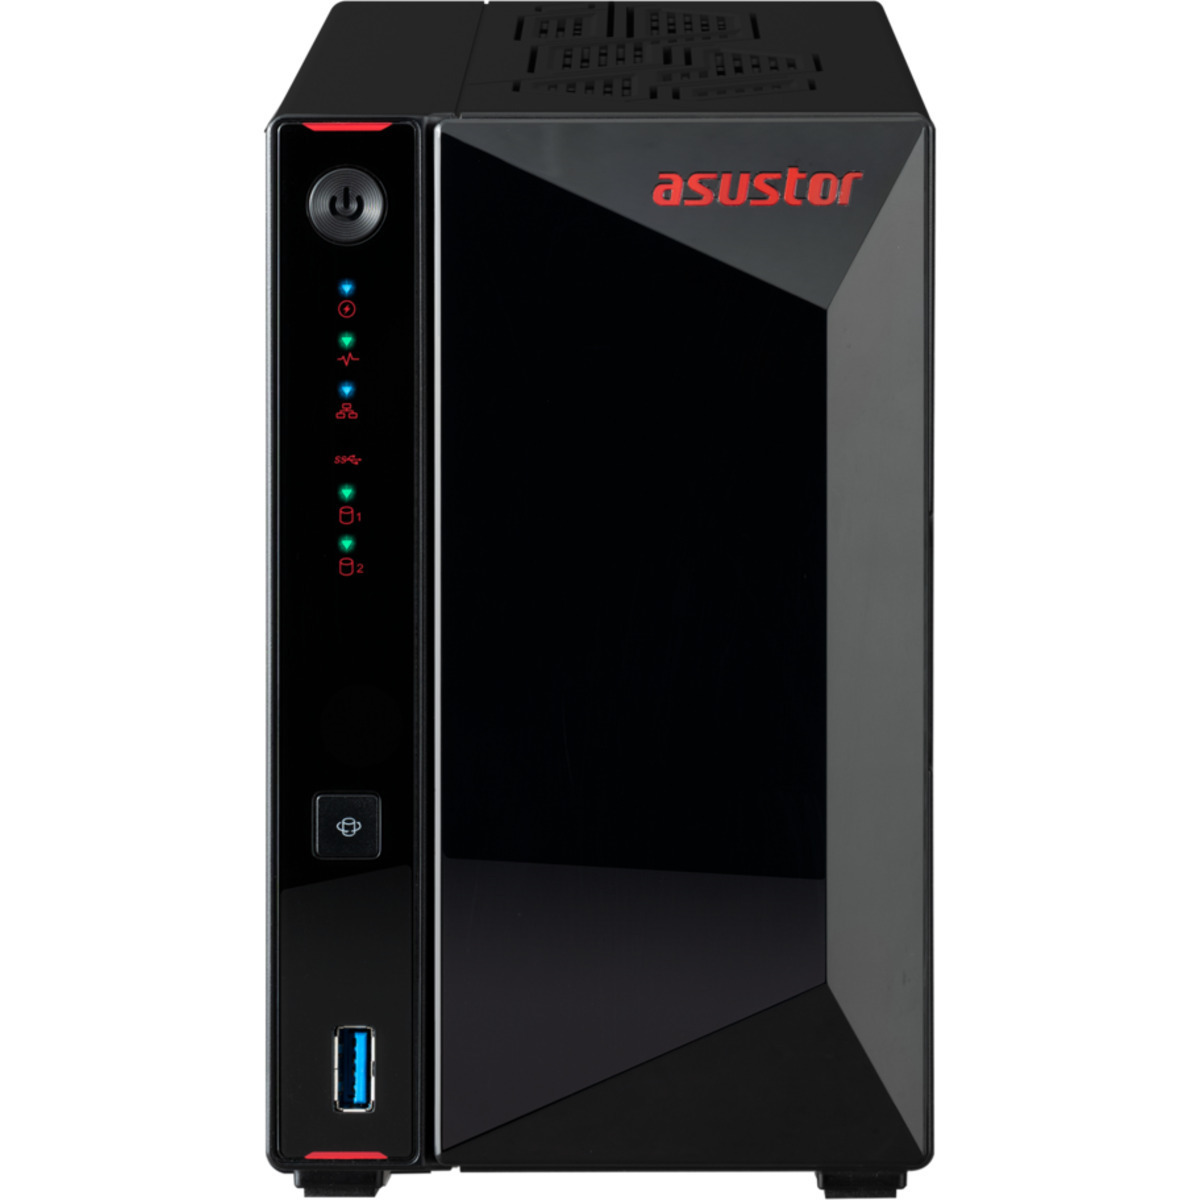 buy $1015 ASUSTOR Nimbustor 2 Gen2 AS5402T 12tb Desktop NAS - Network Attached Storage Device 2x6000gb Seagate IronWolf Pro ST6000NT001 3.5 7200rpm SATA 6Gb/s HDD NAS Class Drives Installed - Burn-In Tested - FREE RAM UPGRADE - nas headquarters buy network attached storage server device das new raid-5 free shipping simply usa Nimbustor 2 Gen2 AS5402T